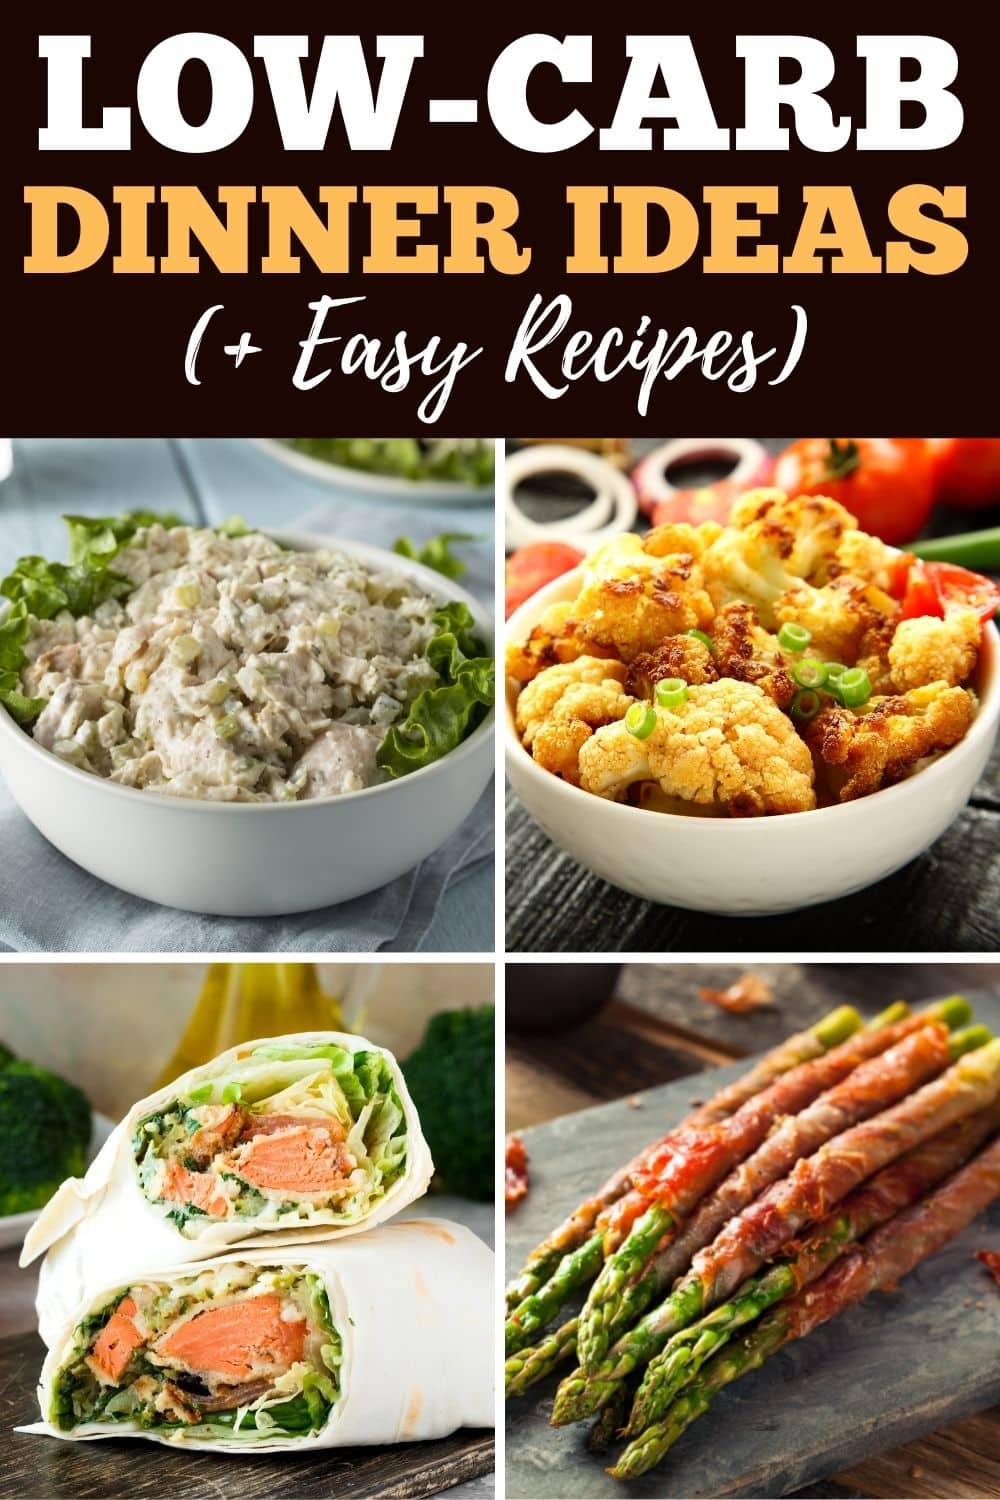 29 Low-Carb Dinner Ideas (+ Easy Recipes) - Insanely Good